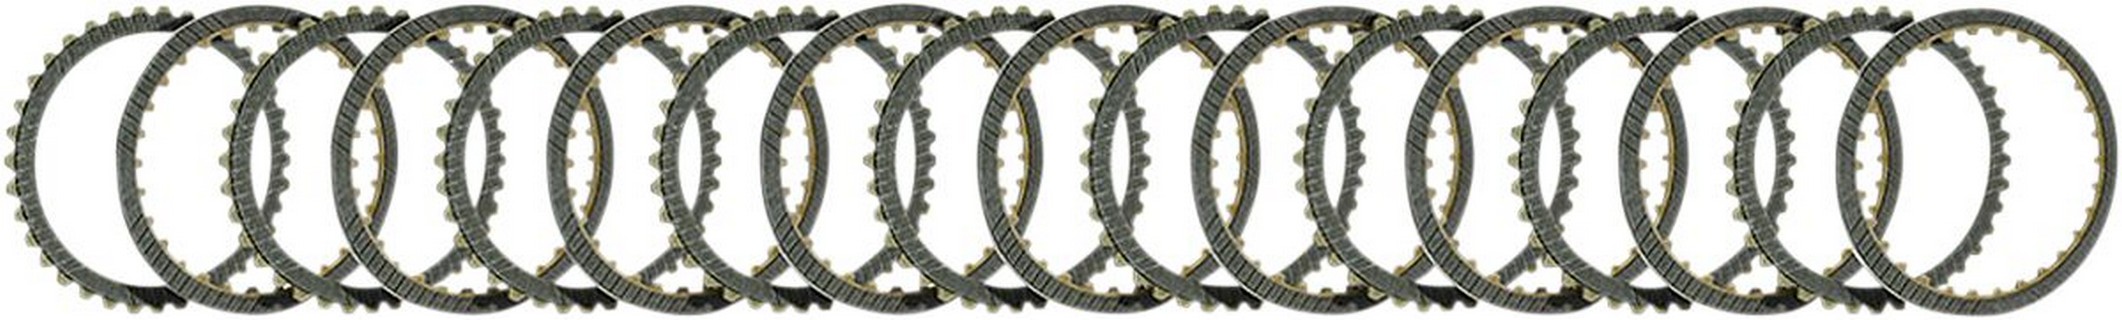  in the group Parts & Accessories / Drivetrain / Clutch / Clutch discs & drive plates at Blixt&Dunder AB (11310460)